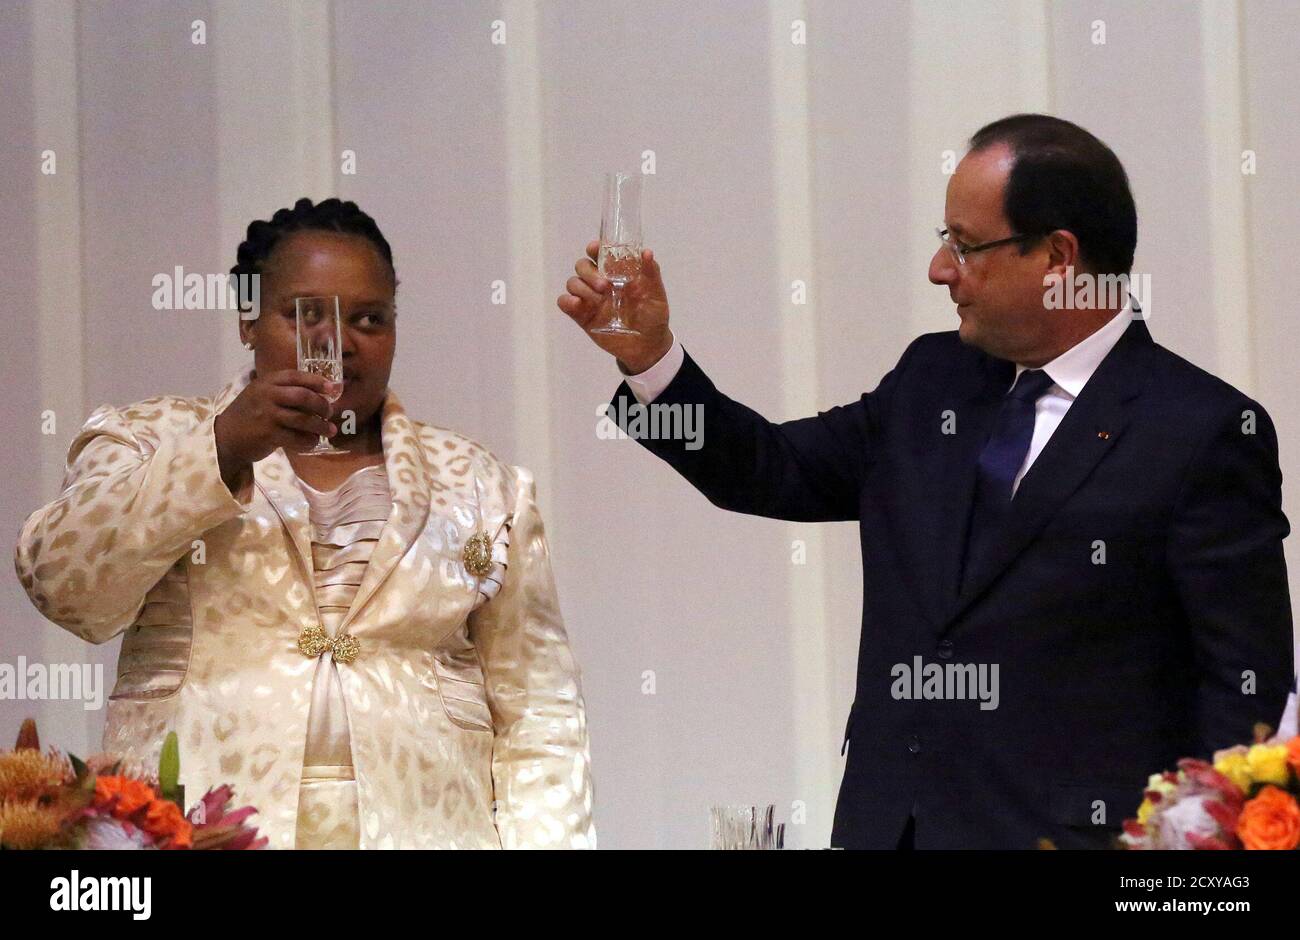 South Africa's First Lady Nompumelelo Zuma (L) and France's President Francois Hollande toast during a gala dinner at the State Guest House in Pretoria October 14, 2013. France will lend 100 million euros ($135 million) to South African state power utility Eskom to help it finance solar power projects in Africa's largest economy, according to a communique obtained by Reuters on Monday. The deal will be signed as a part of a summit between Hollande and South Africa's President Jacob Zuma, which started on Monday in Pretoria. REUTERS/Siphiwe Sibeko (SOUTH AFRICA - Tags: POLITICS BUSINESS ENERGY) Stock Photo